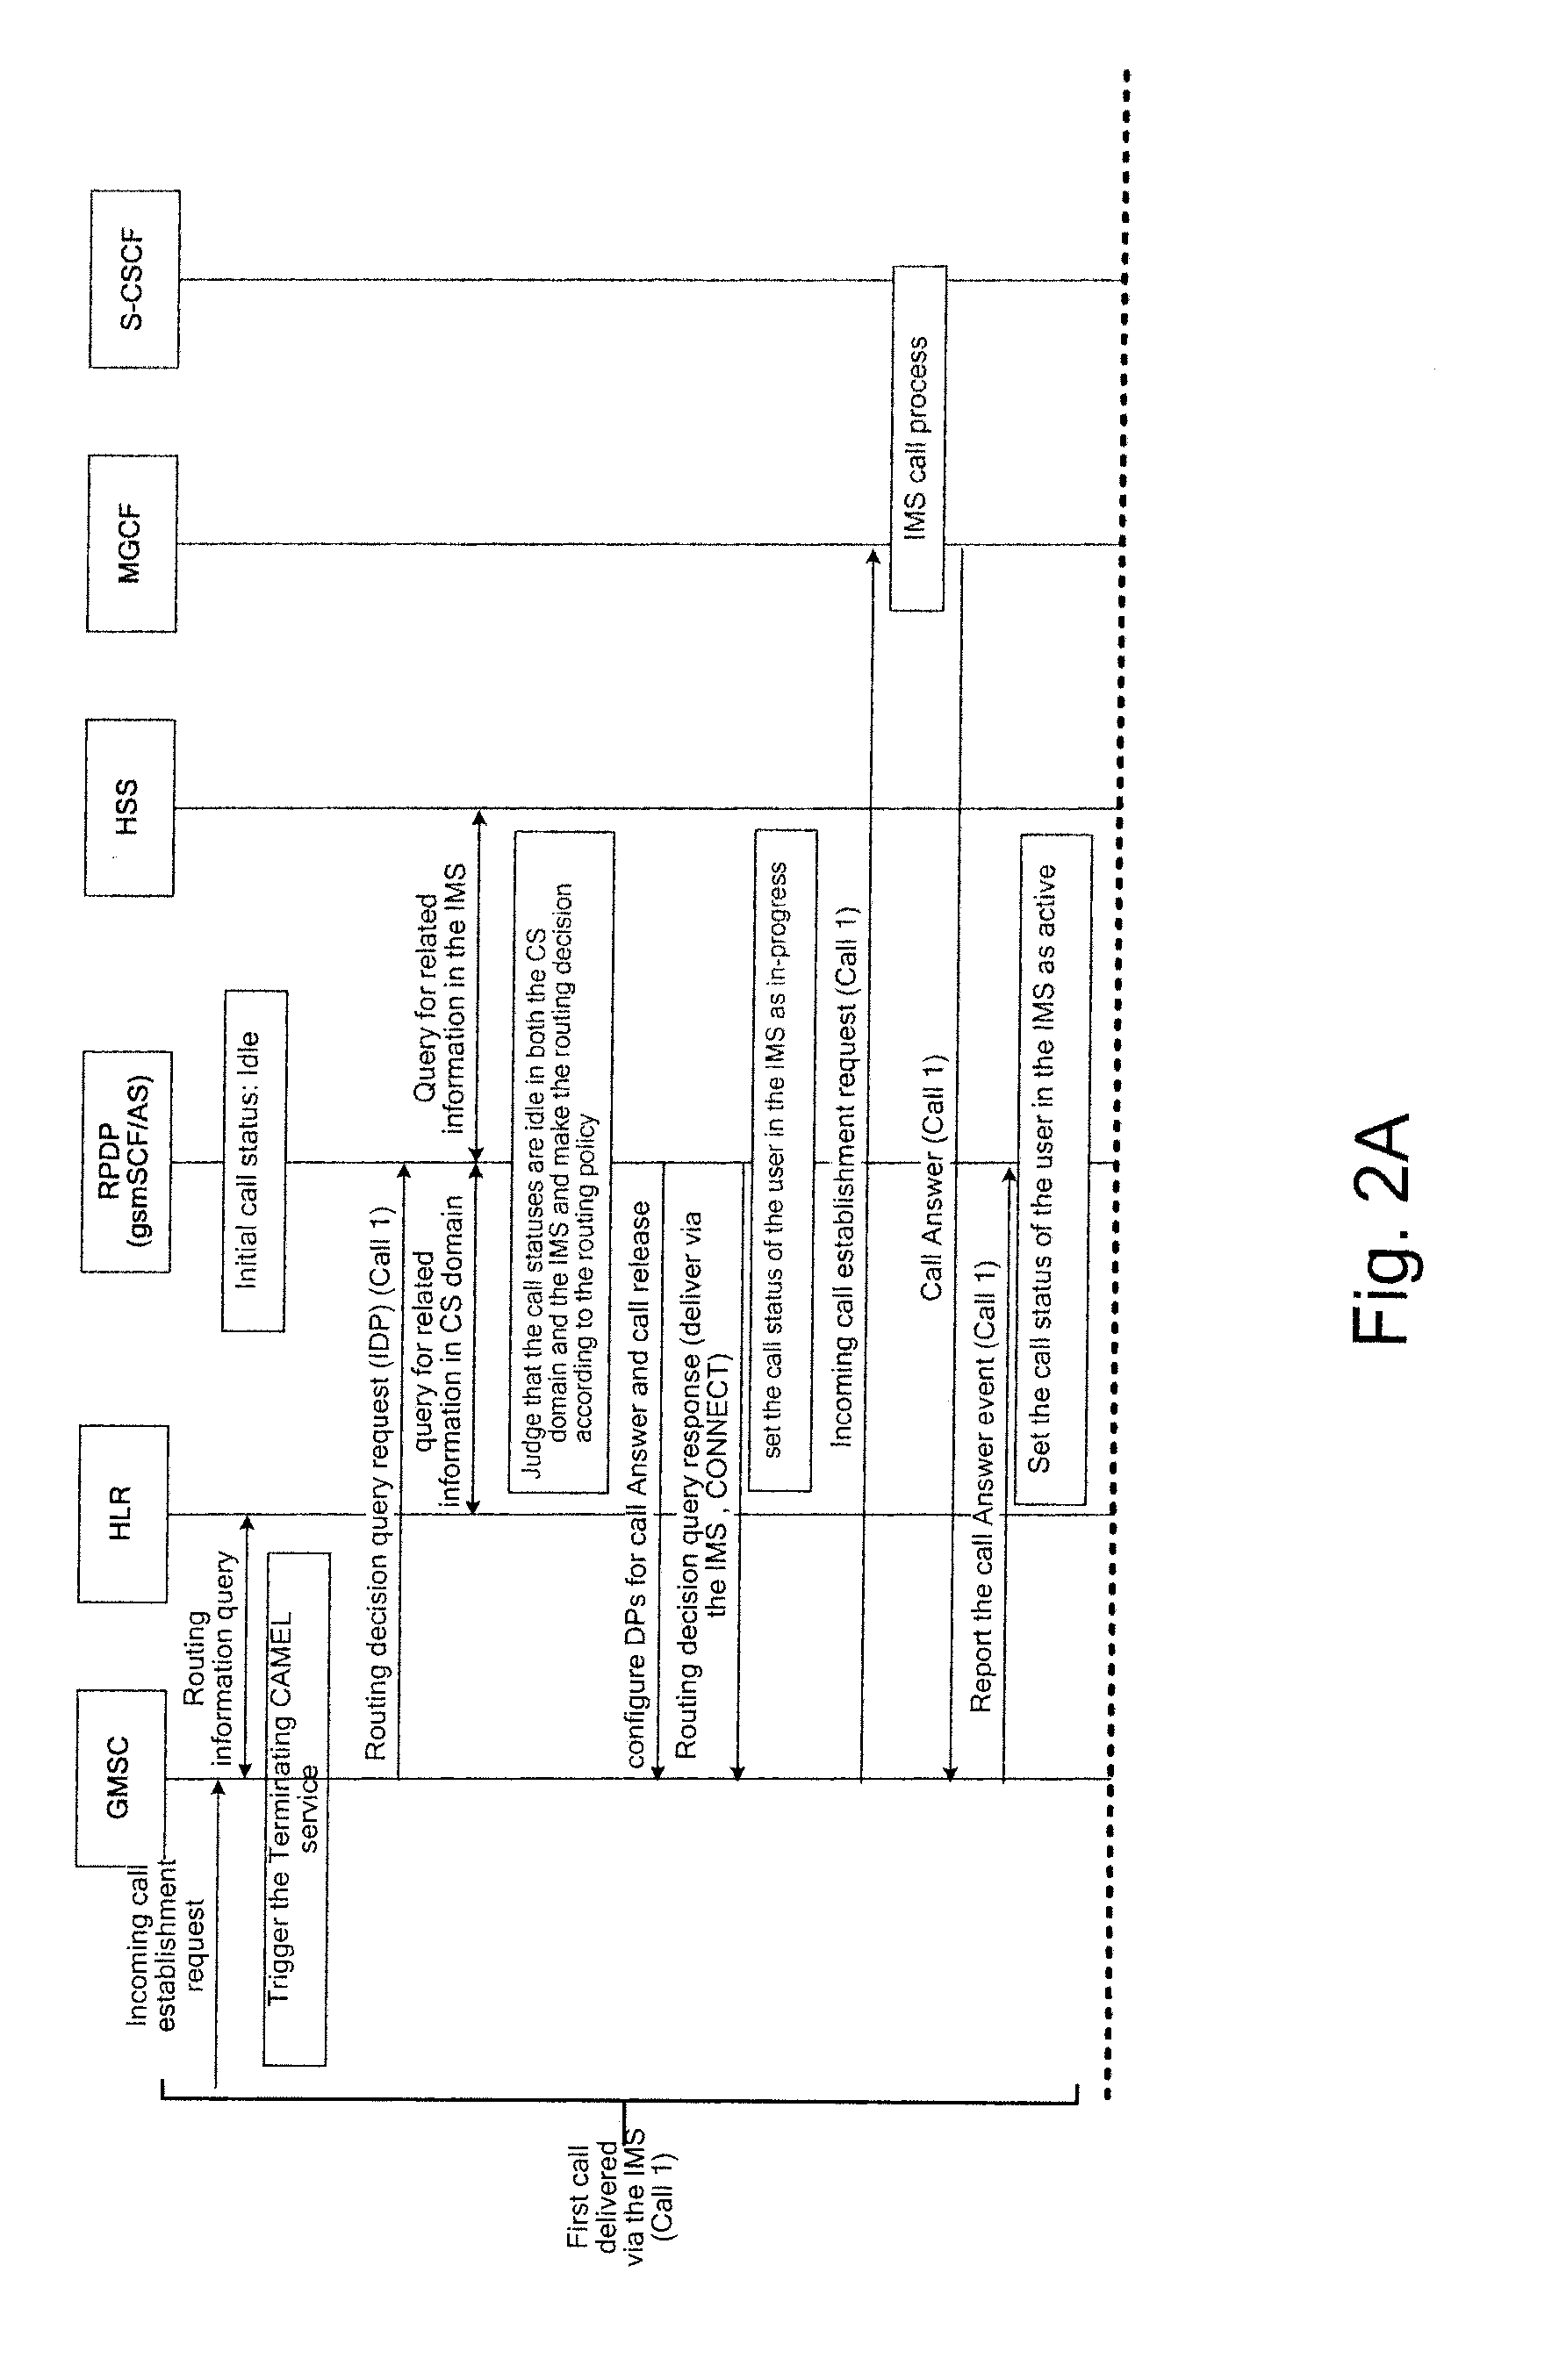 Method and apparatus of domain selection for routing control